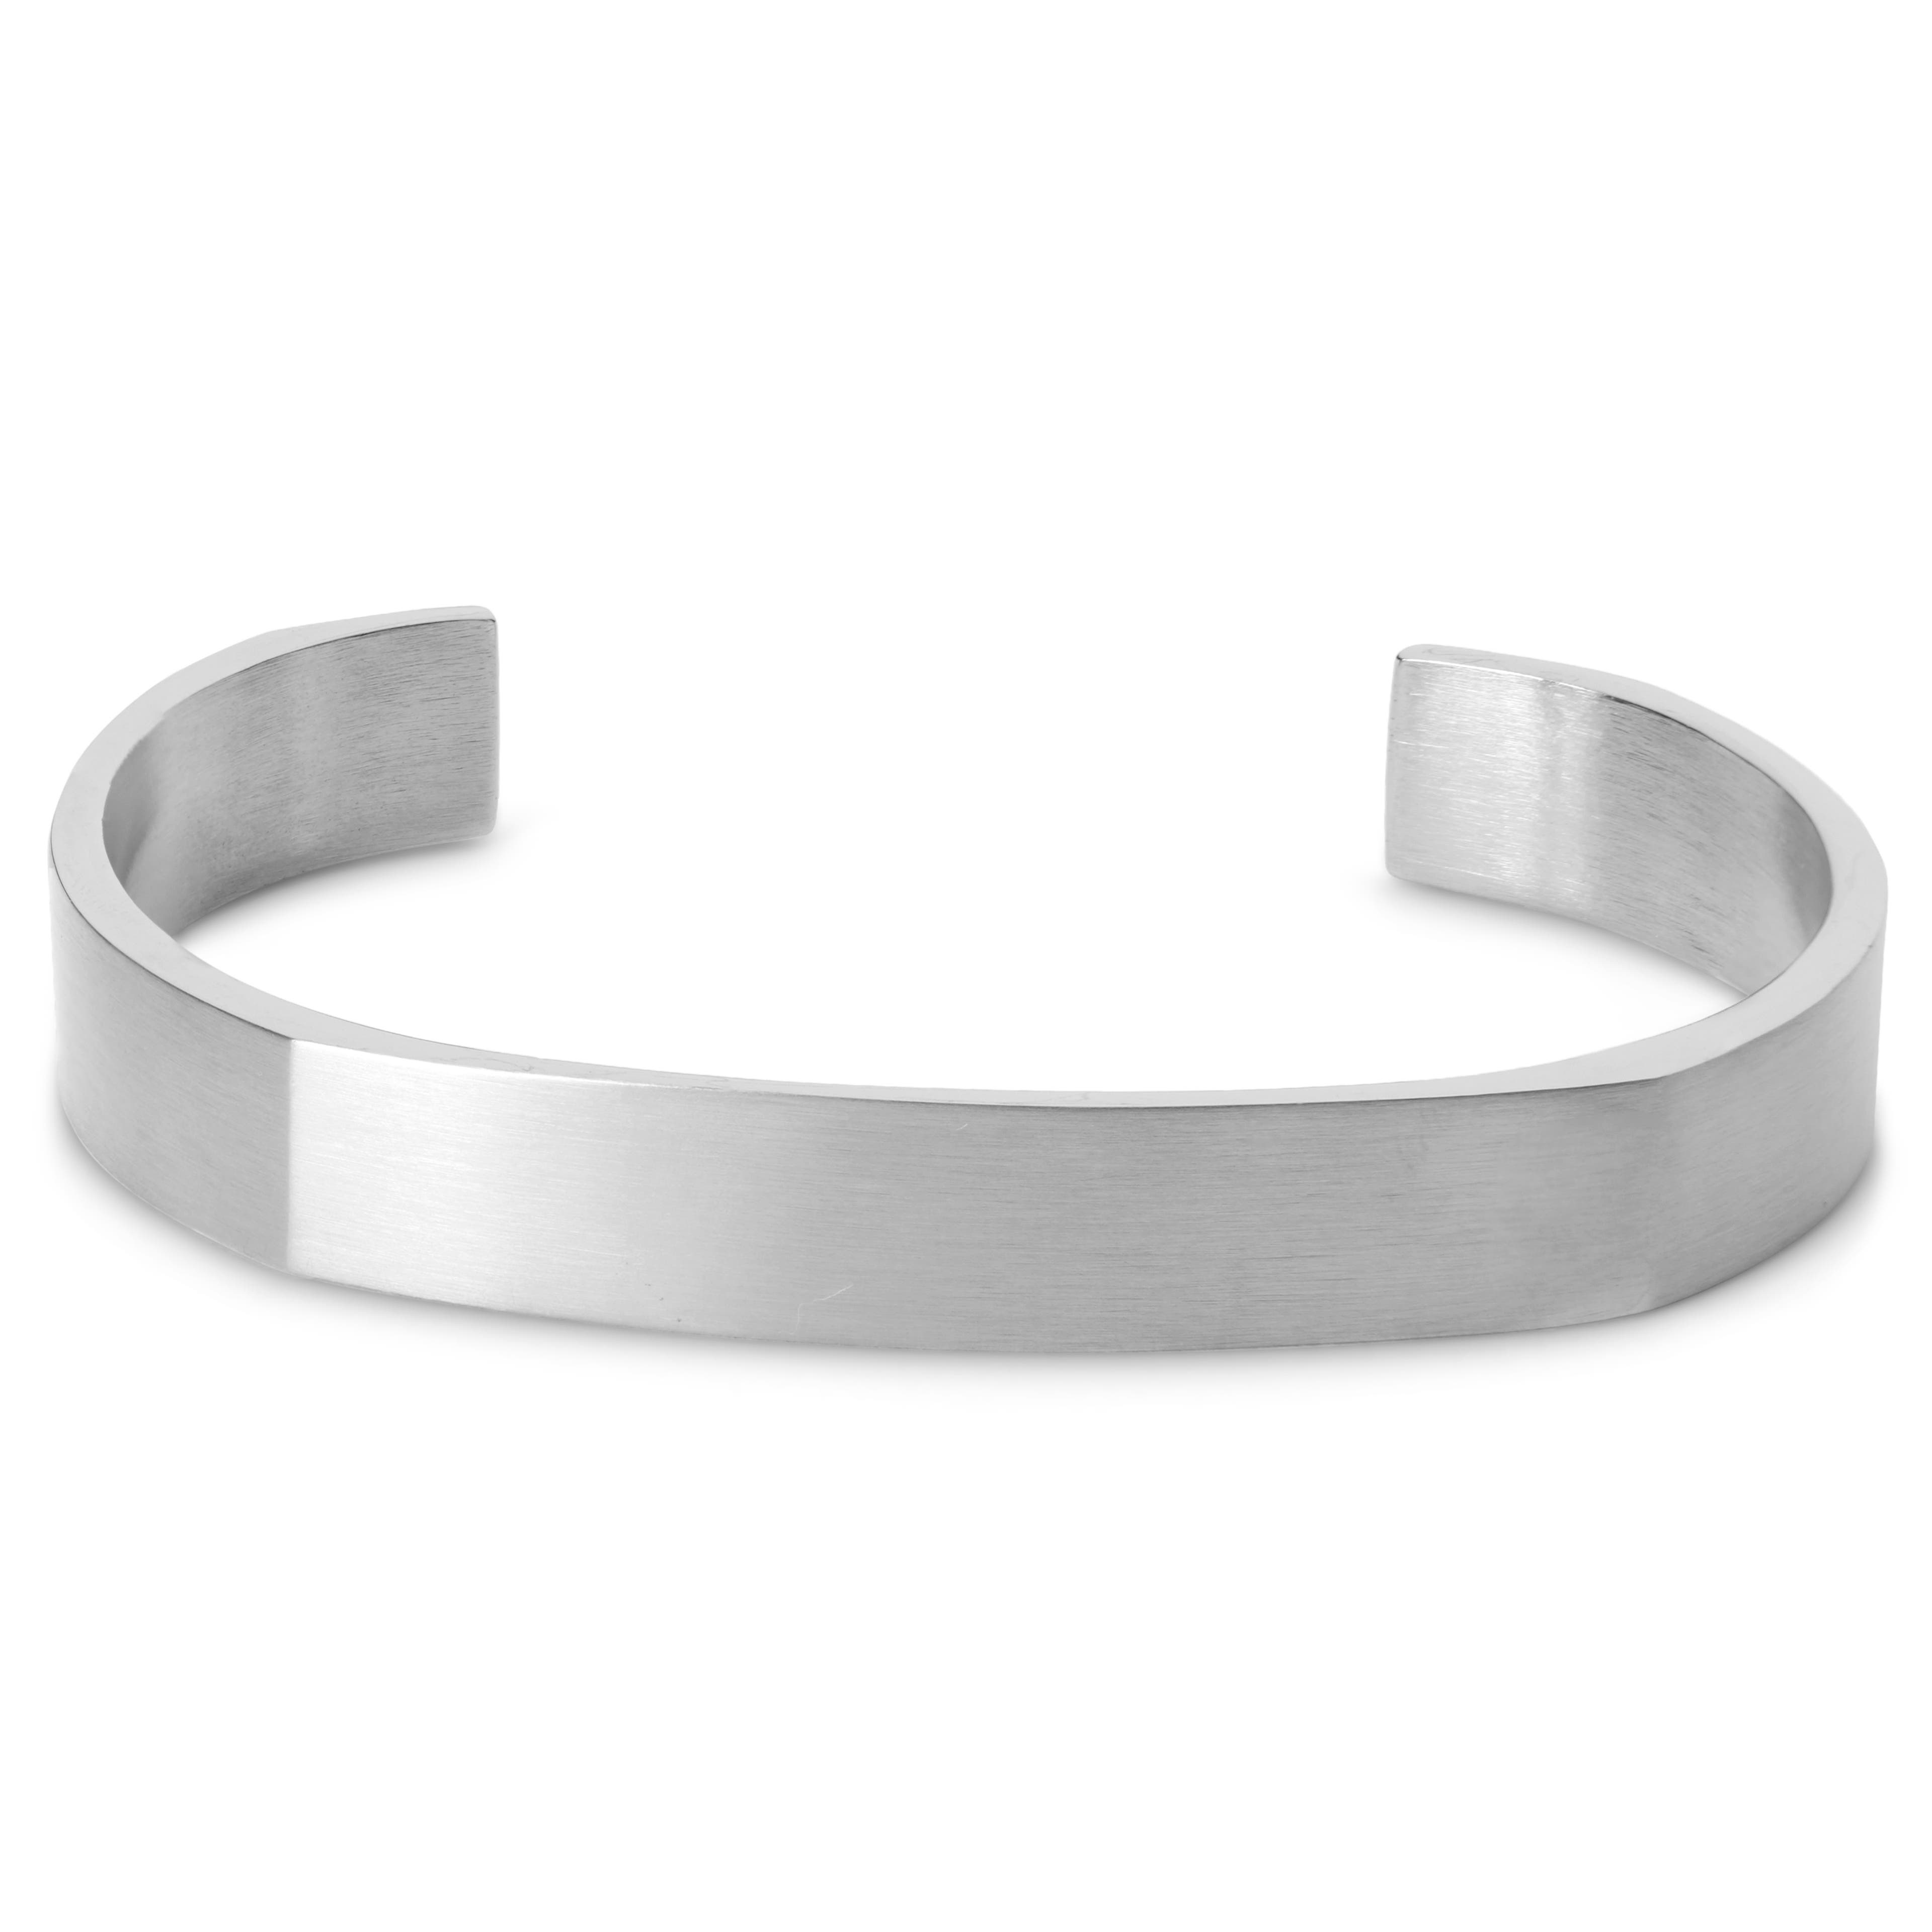 Brushed Silver-Tone Stainless Steel Cuff Bracelet